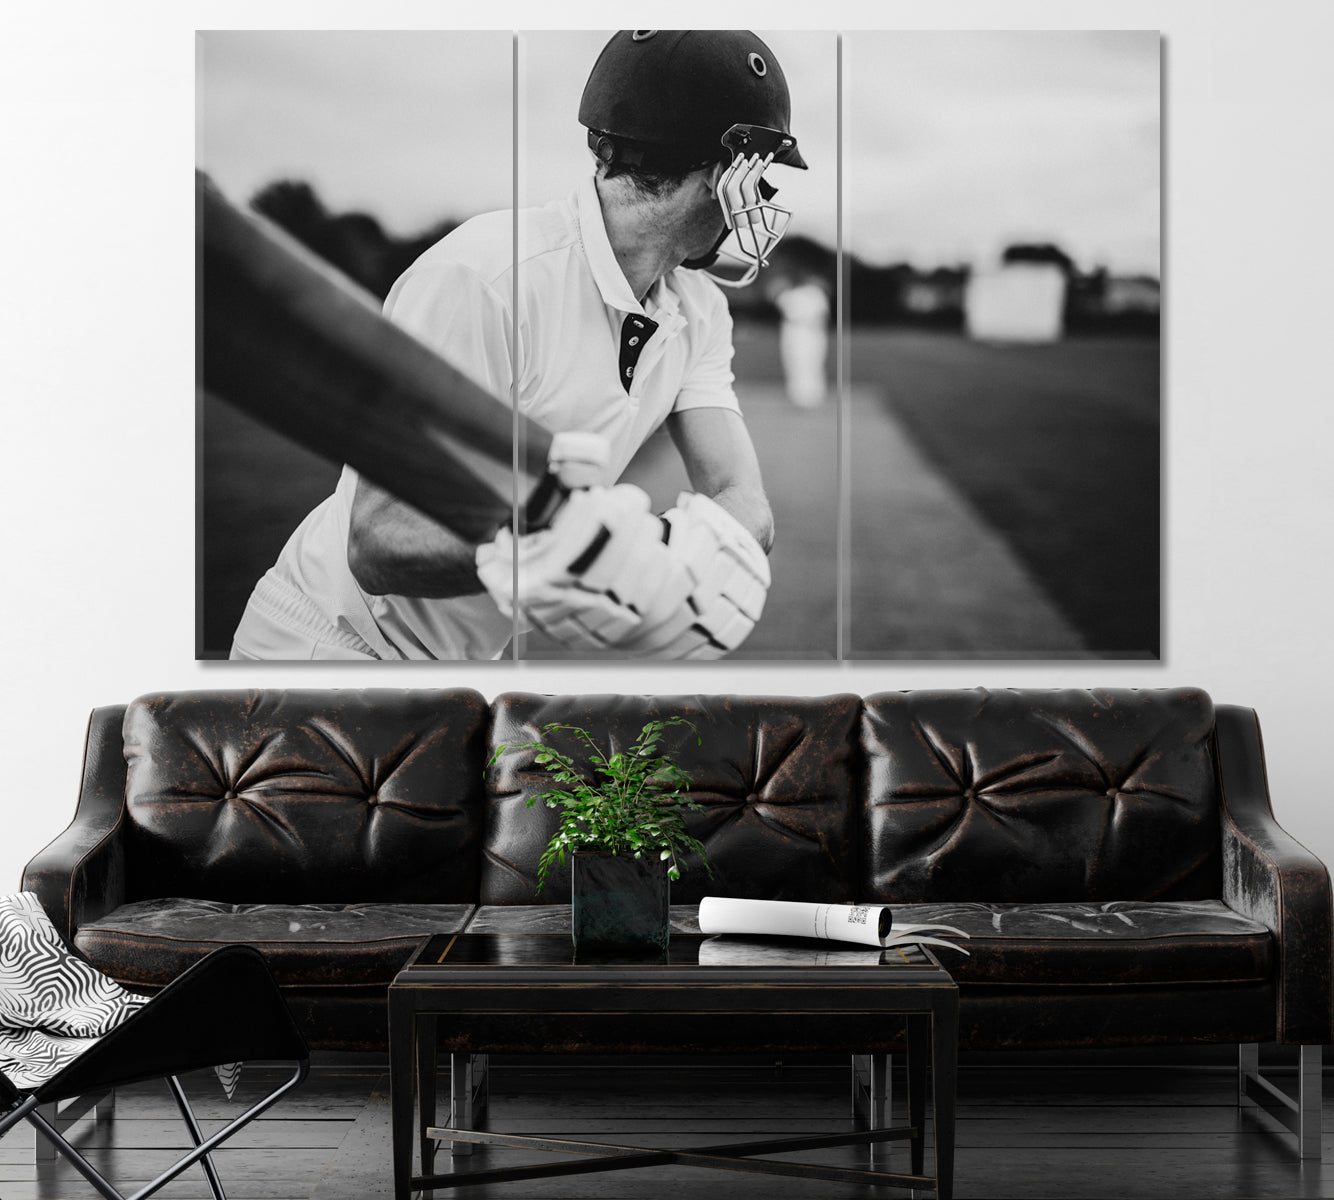 Cricketer in Action Canvas Print ArtLexy 3 Panels 36"x24" inches 